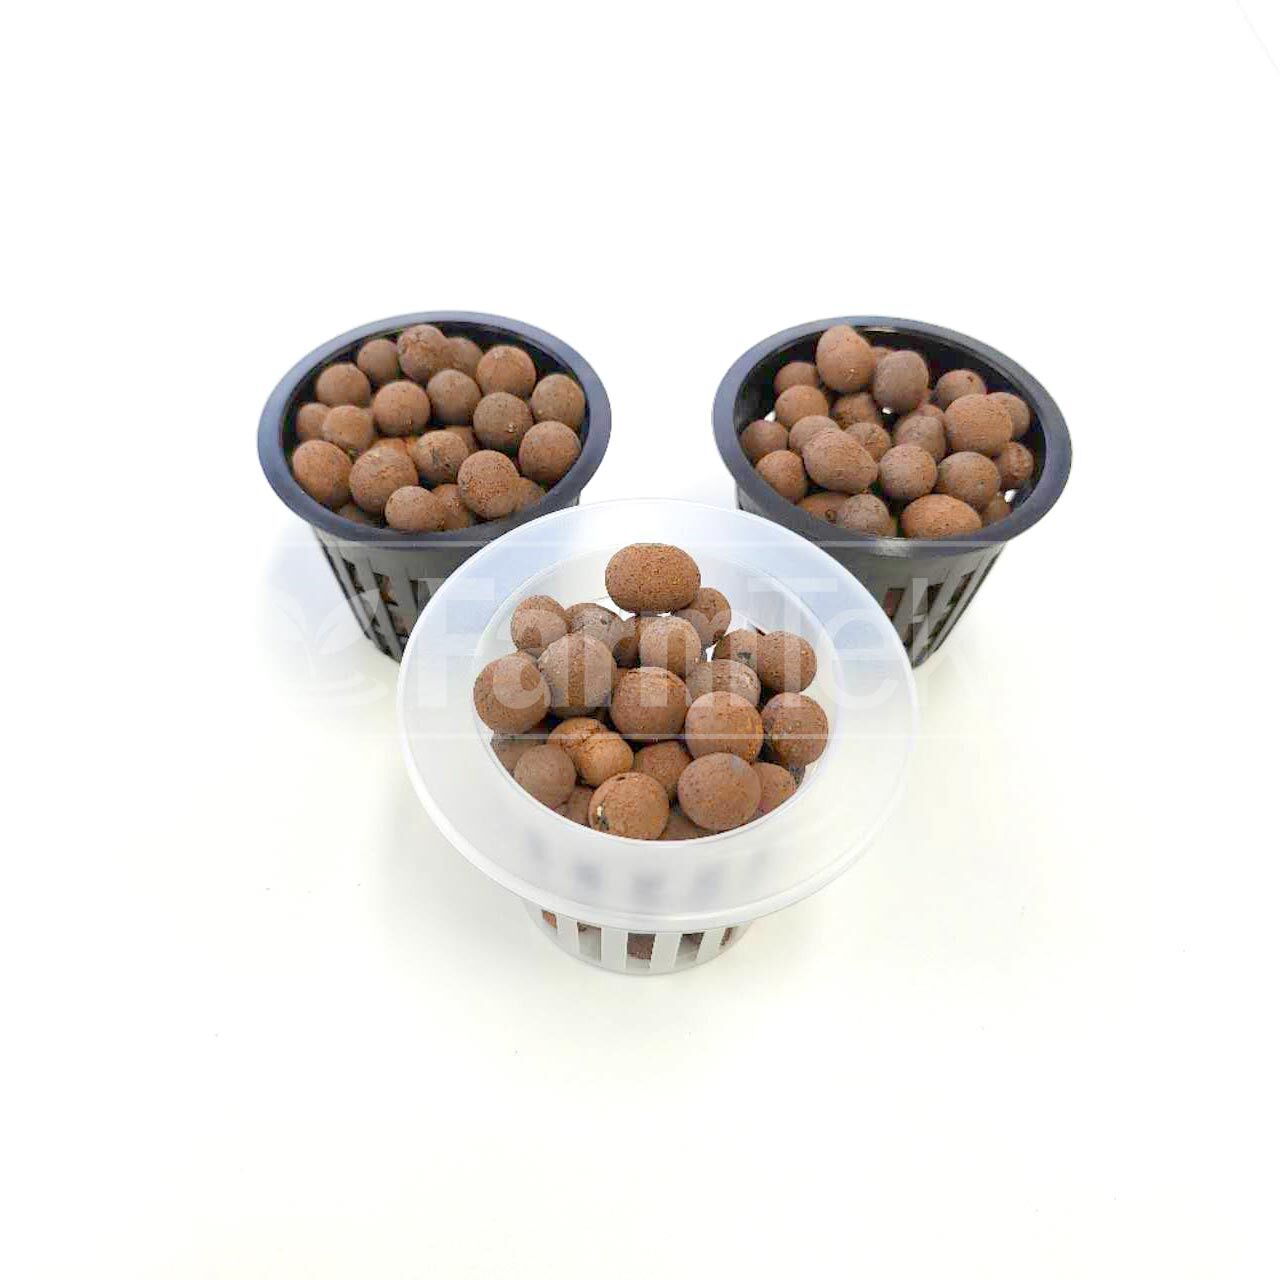 FarmTek® Expanded Clay Pebbles For Plants Hydro Clay Balls 8-16mm Mix 45L Pack